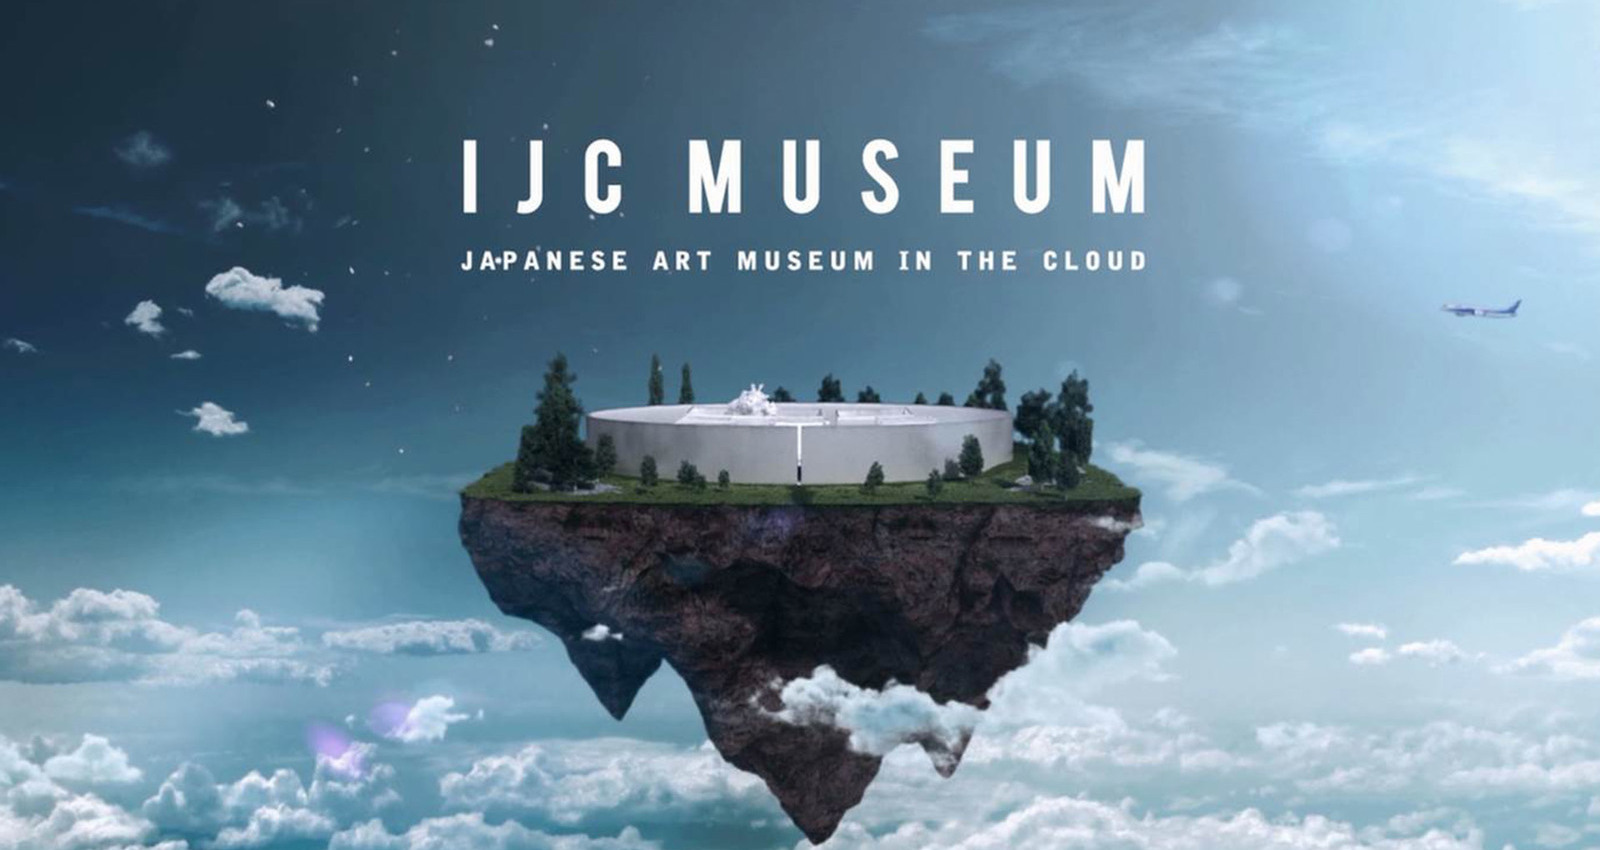 MUSEUM IN THE CLOUD